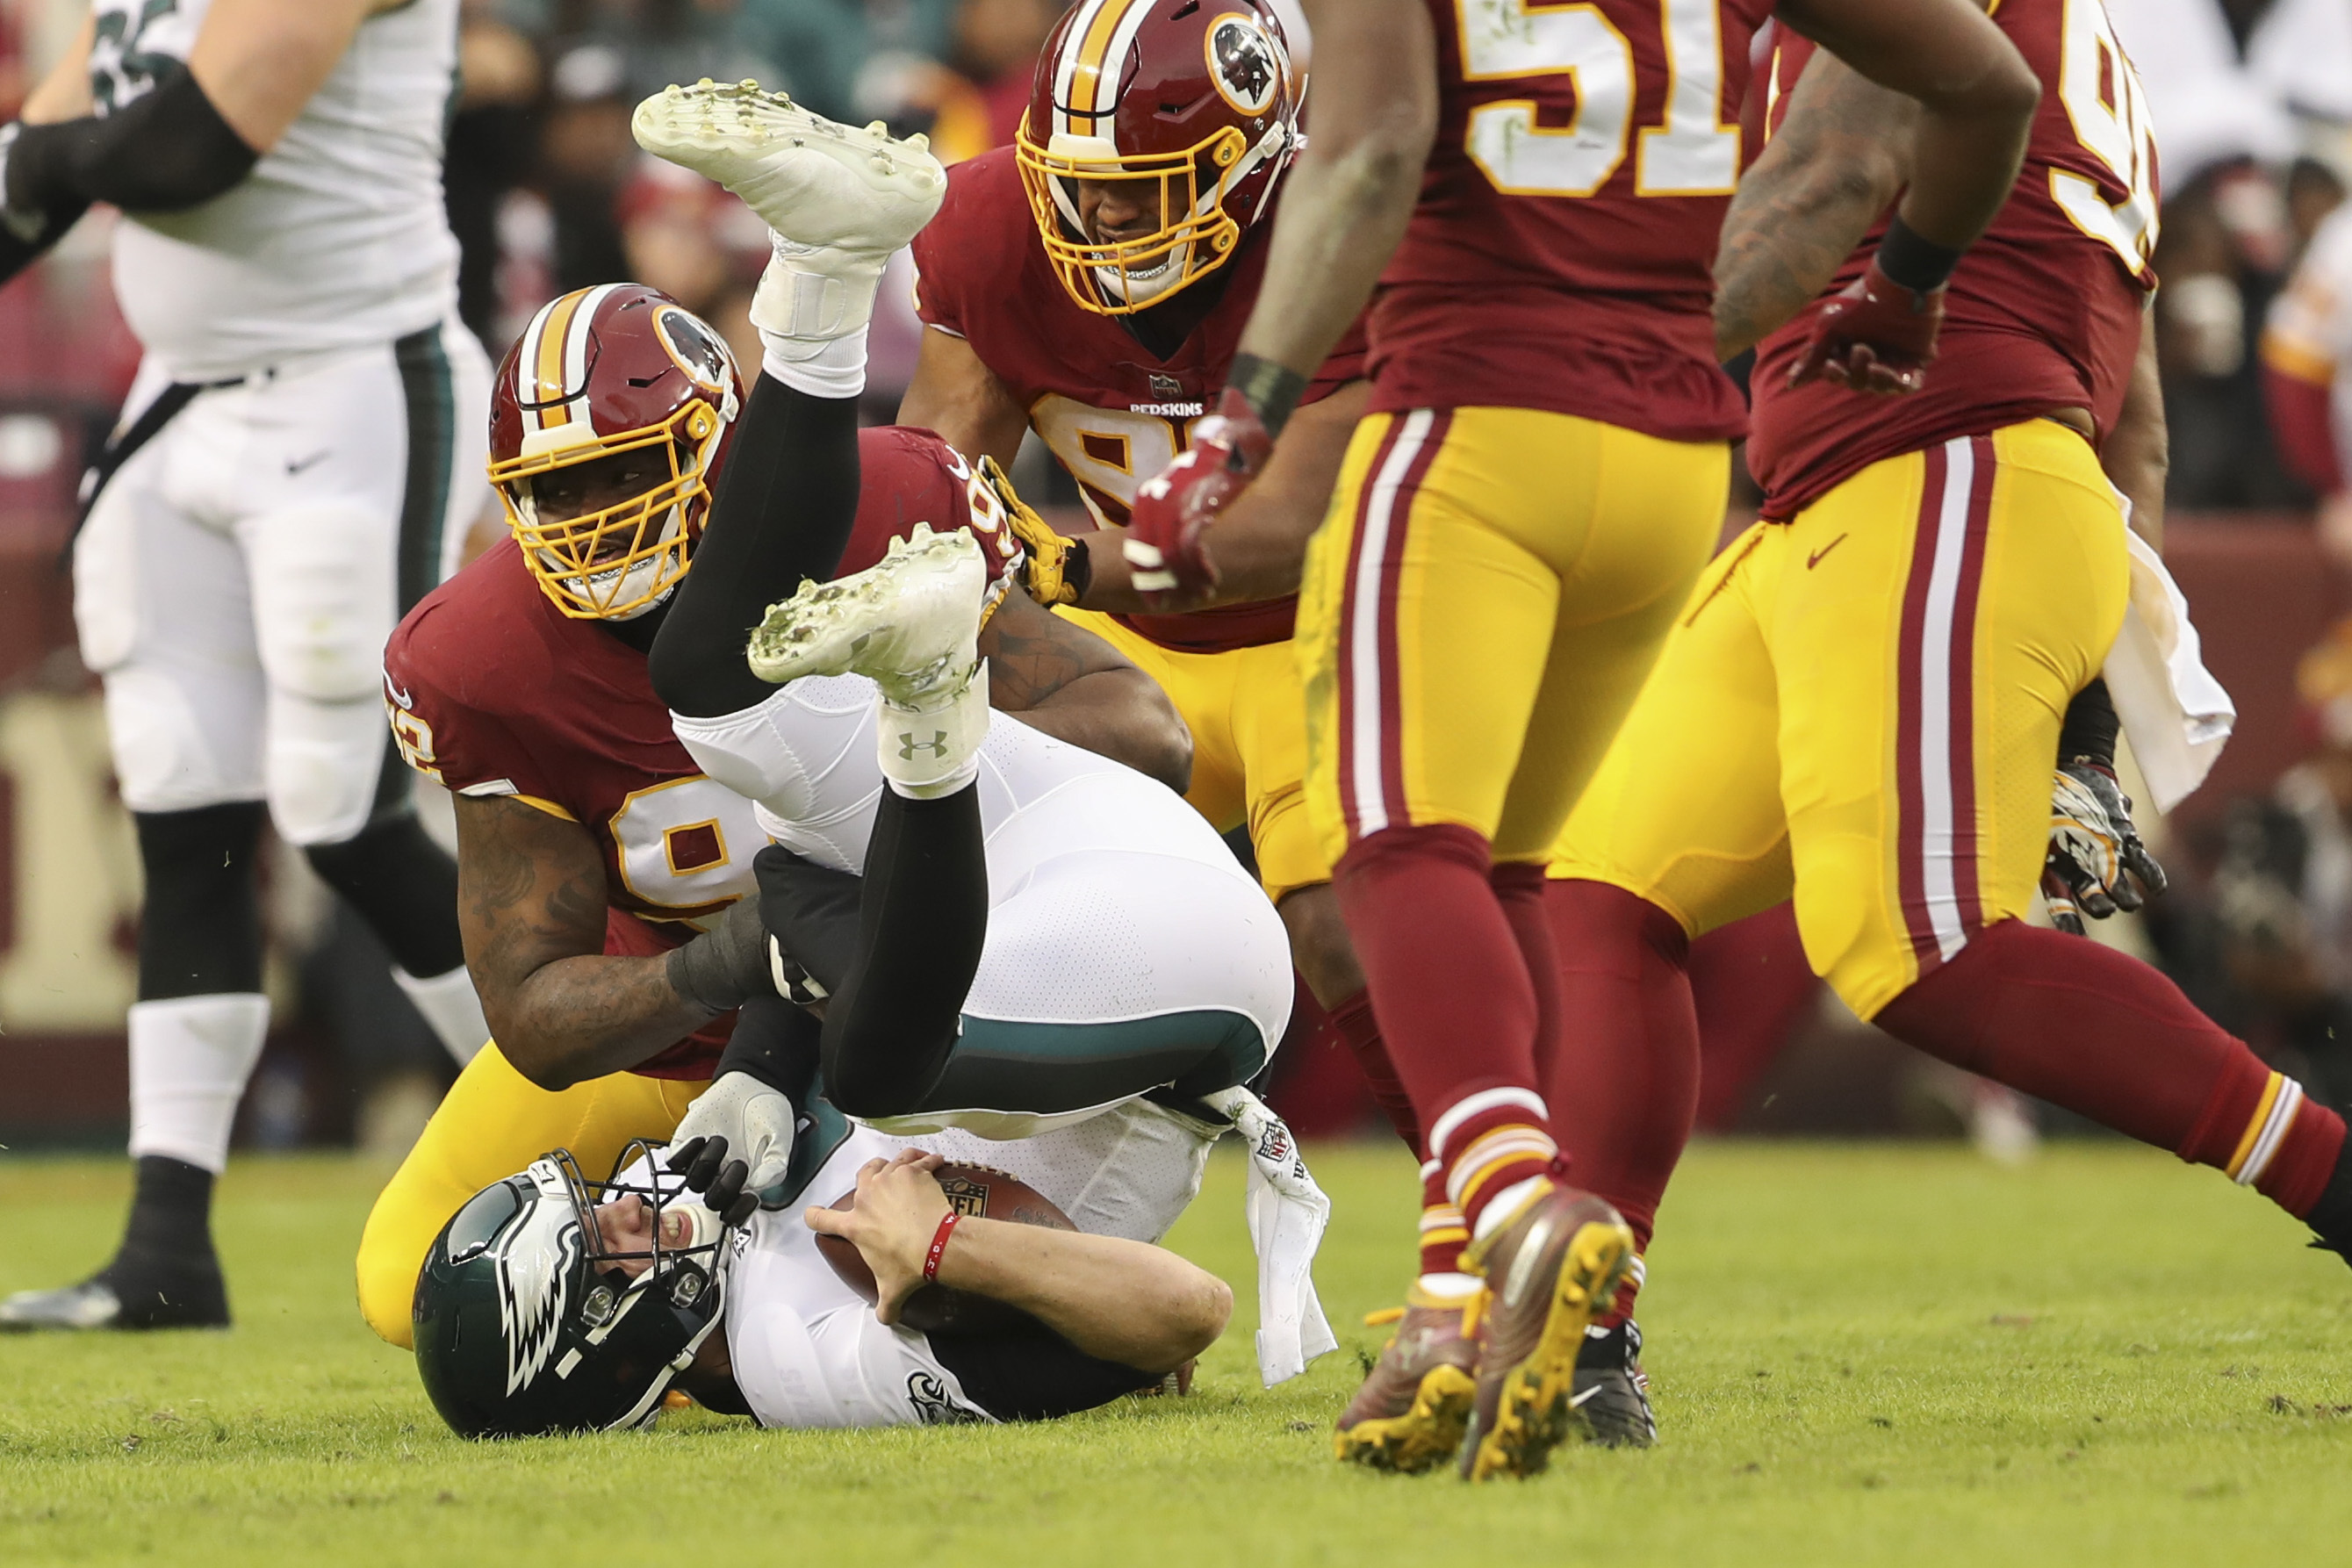 Playoff-bound Eagles get scare with chest injury to Foles